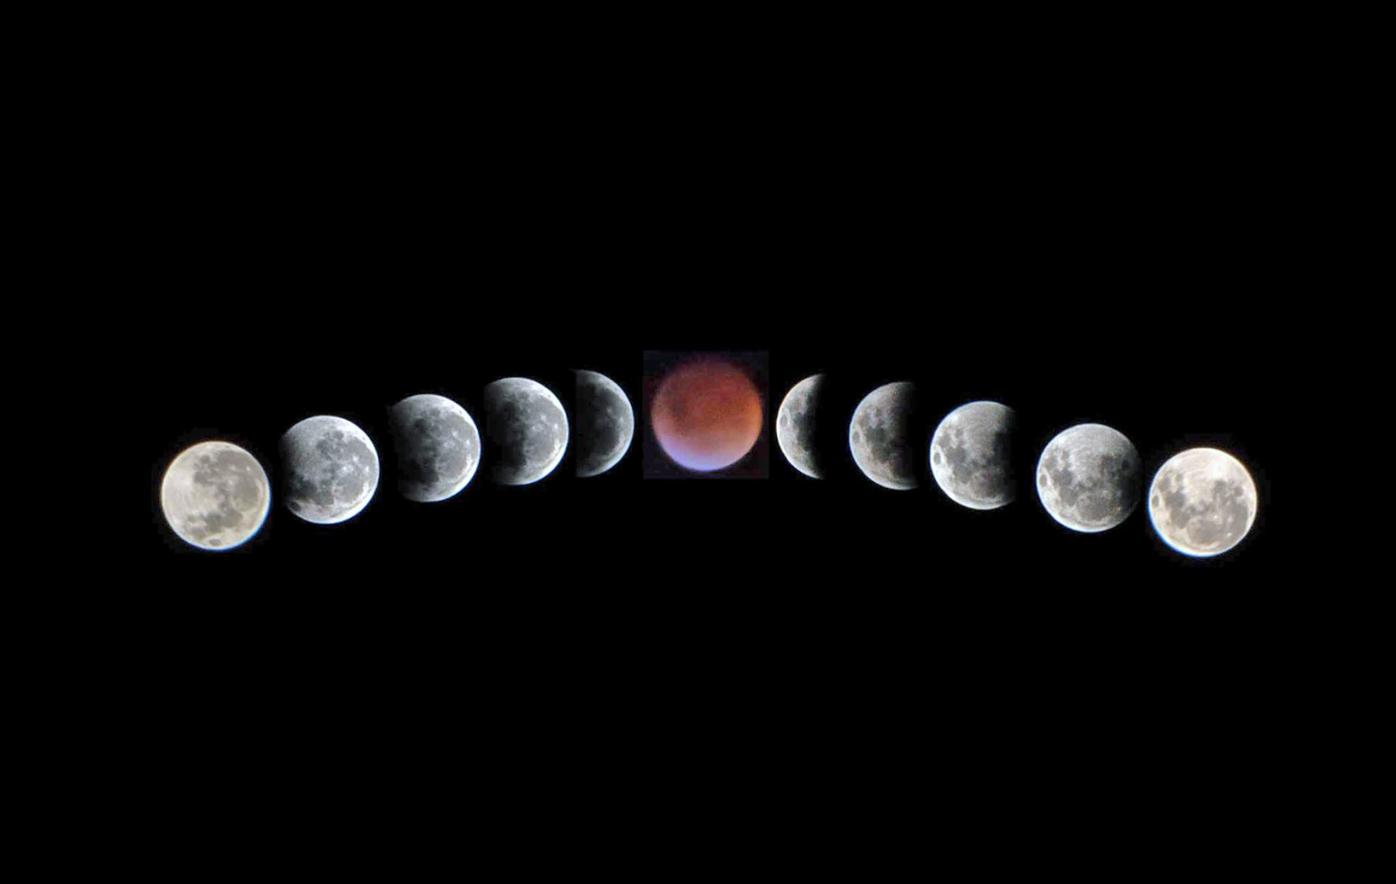 Supermoon Comes With Last Total Lunar Eclipse Until 2021 | Local News | greenevillesun.com